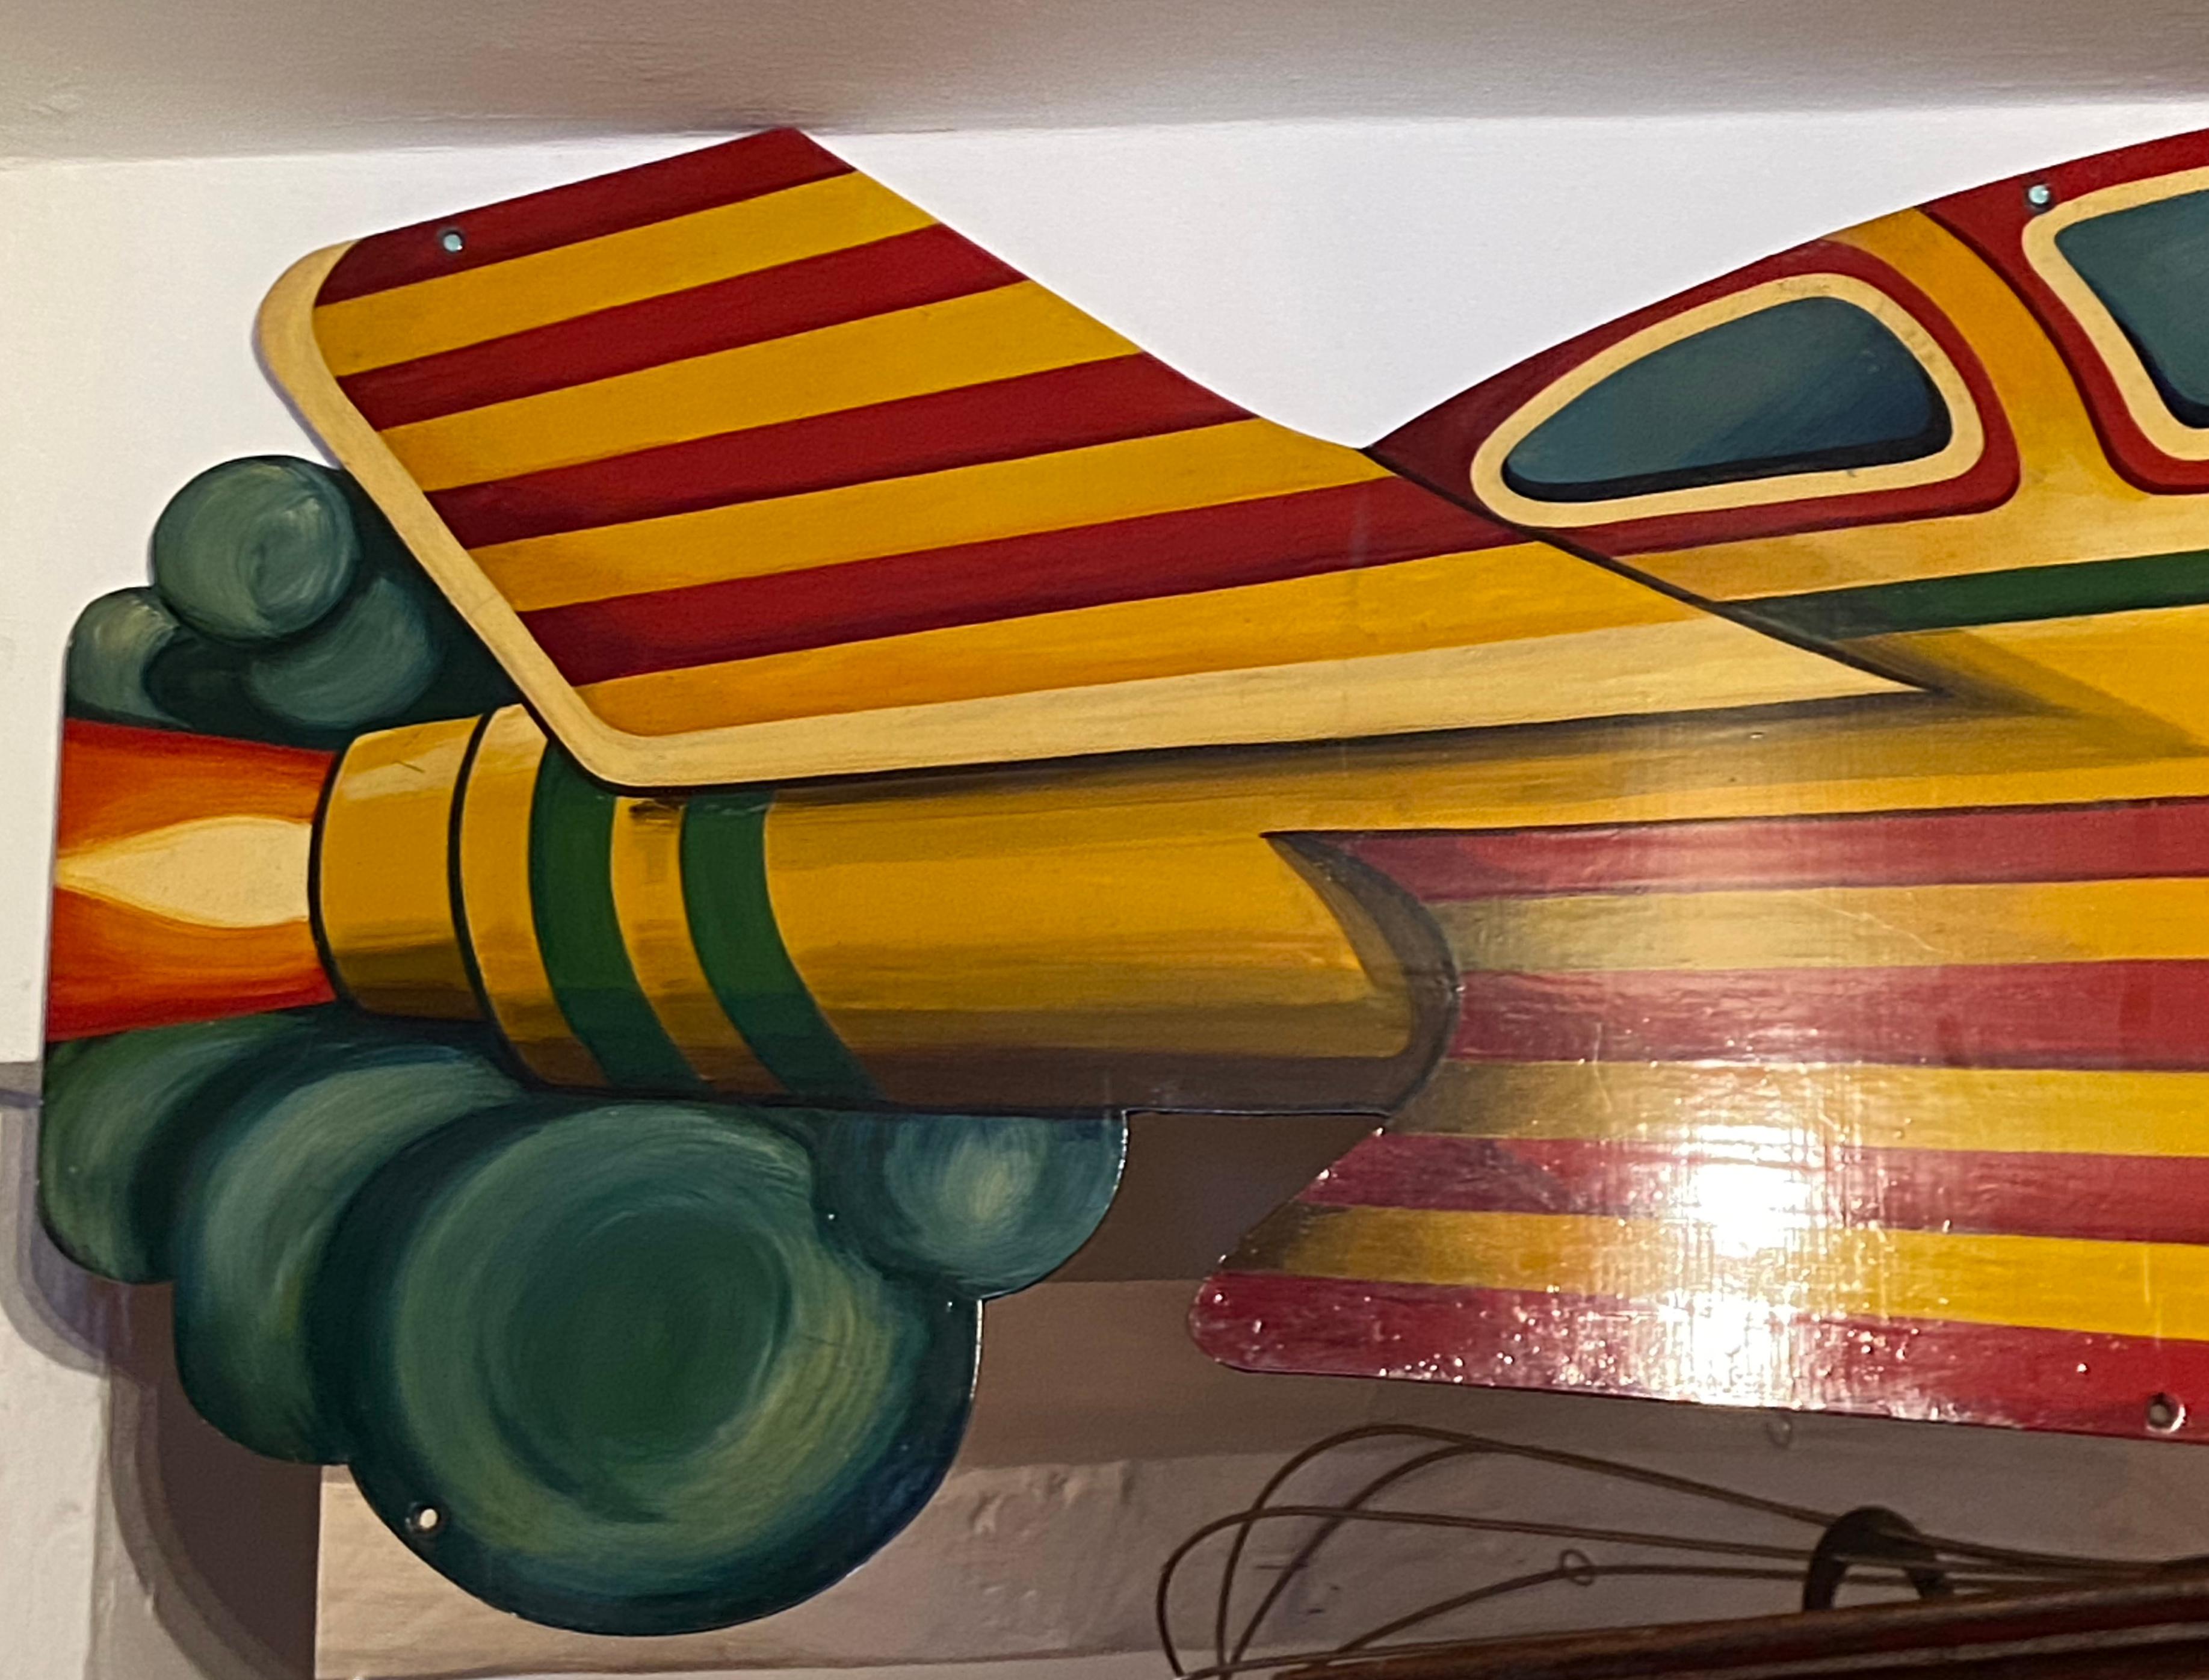 Wonderful metal hand painted Spaceship, Racing Aircraft by Anna Carter, signed and dated 1997.

Carters steam fair is a traditional English travelling funfair with rides dating from the 1890s-1960s. The Carters soon became known as specialists in